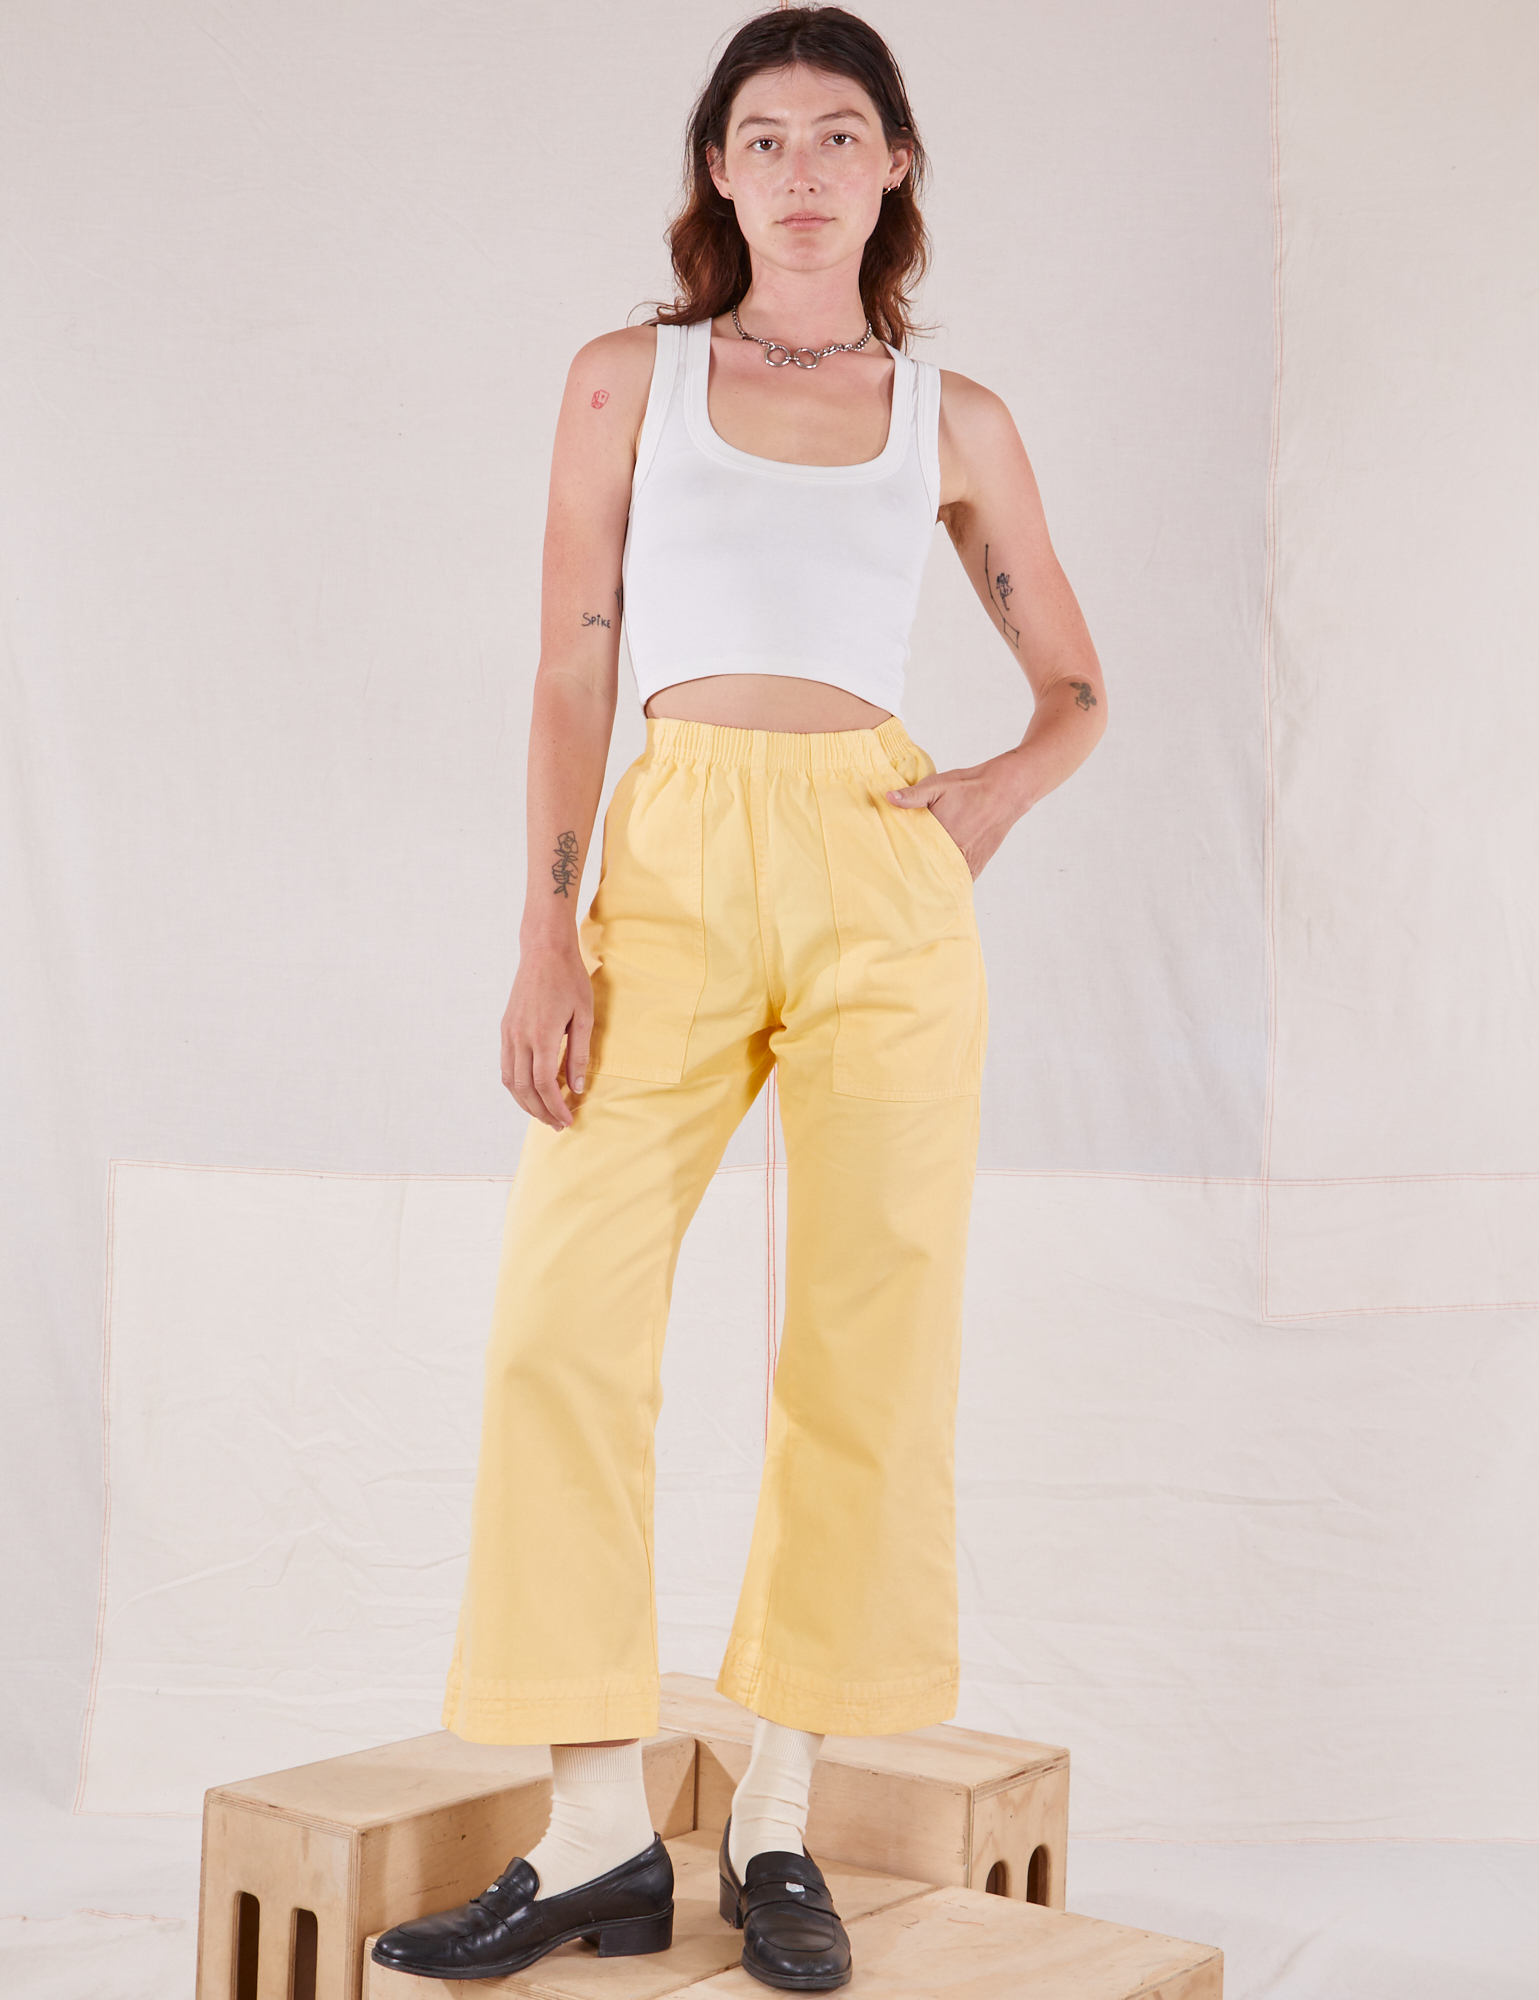 Alex is 5'8" and wearing P Action Pants in Butter Yellow paired with Cropped Tank in vintage tee off-white